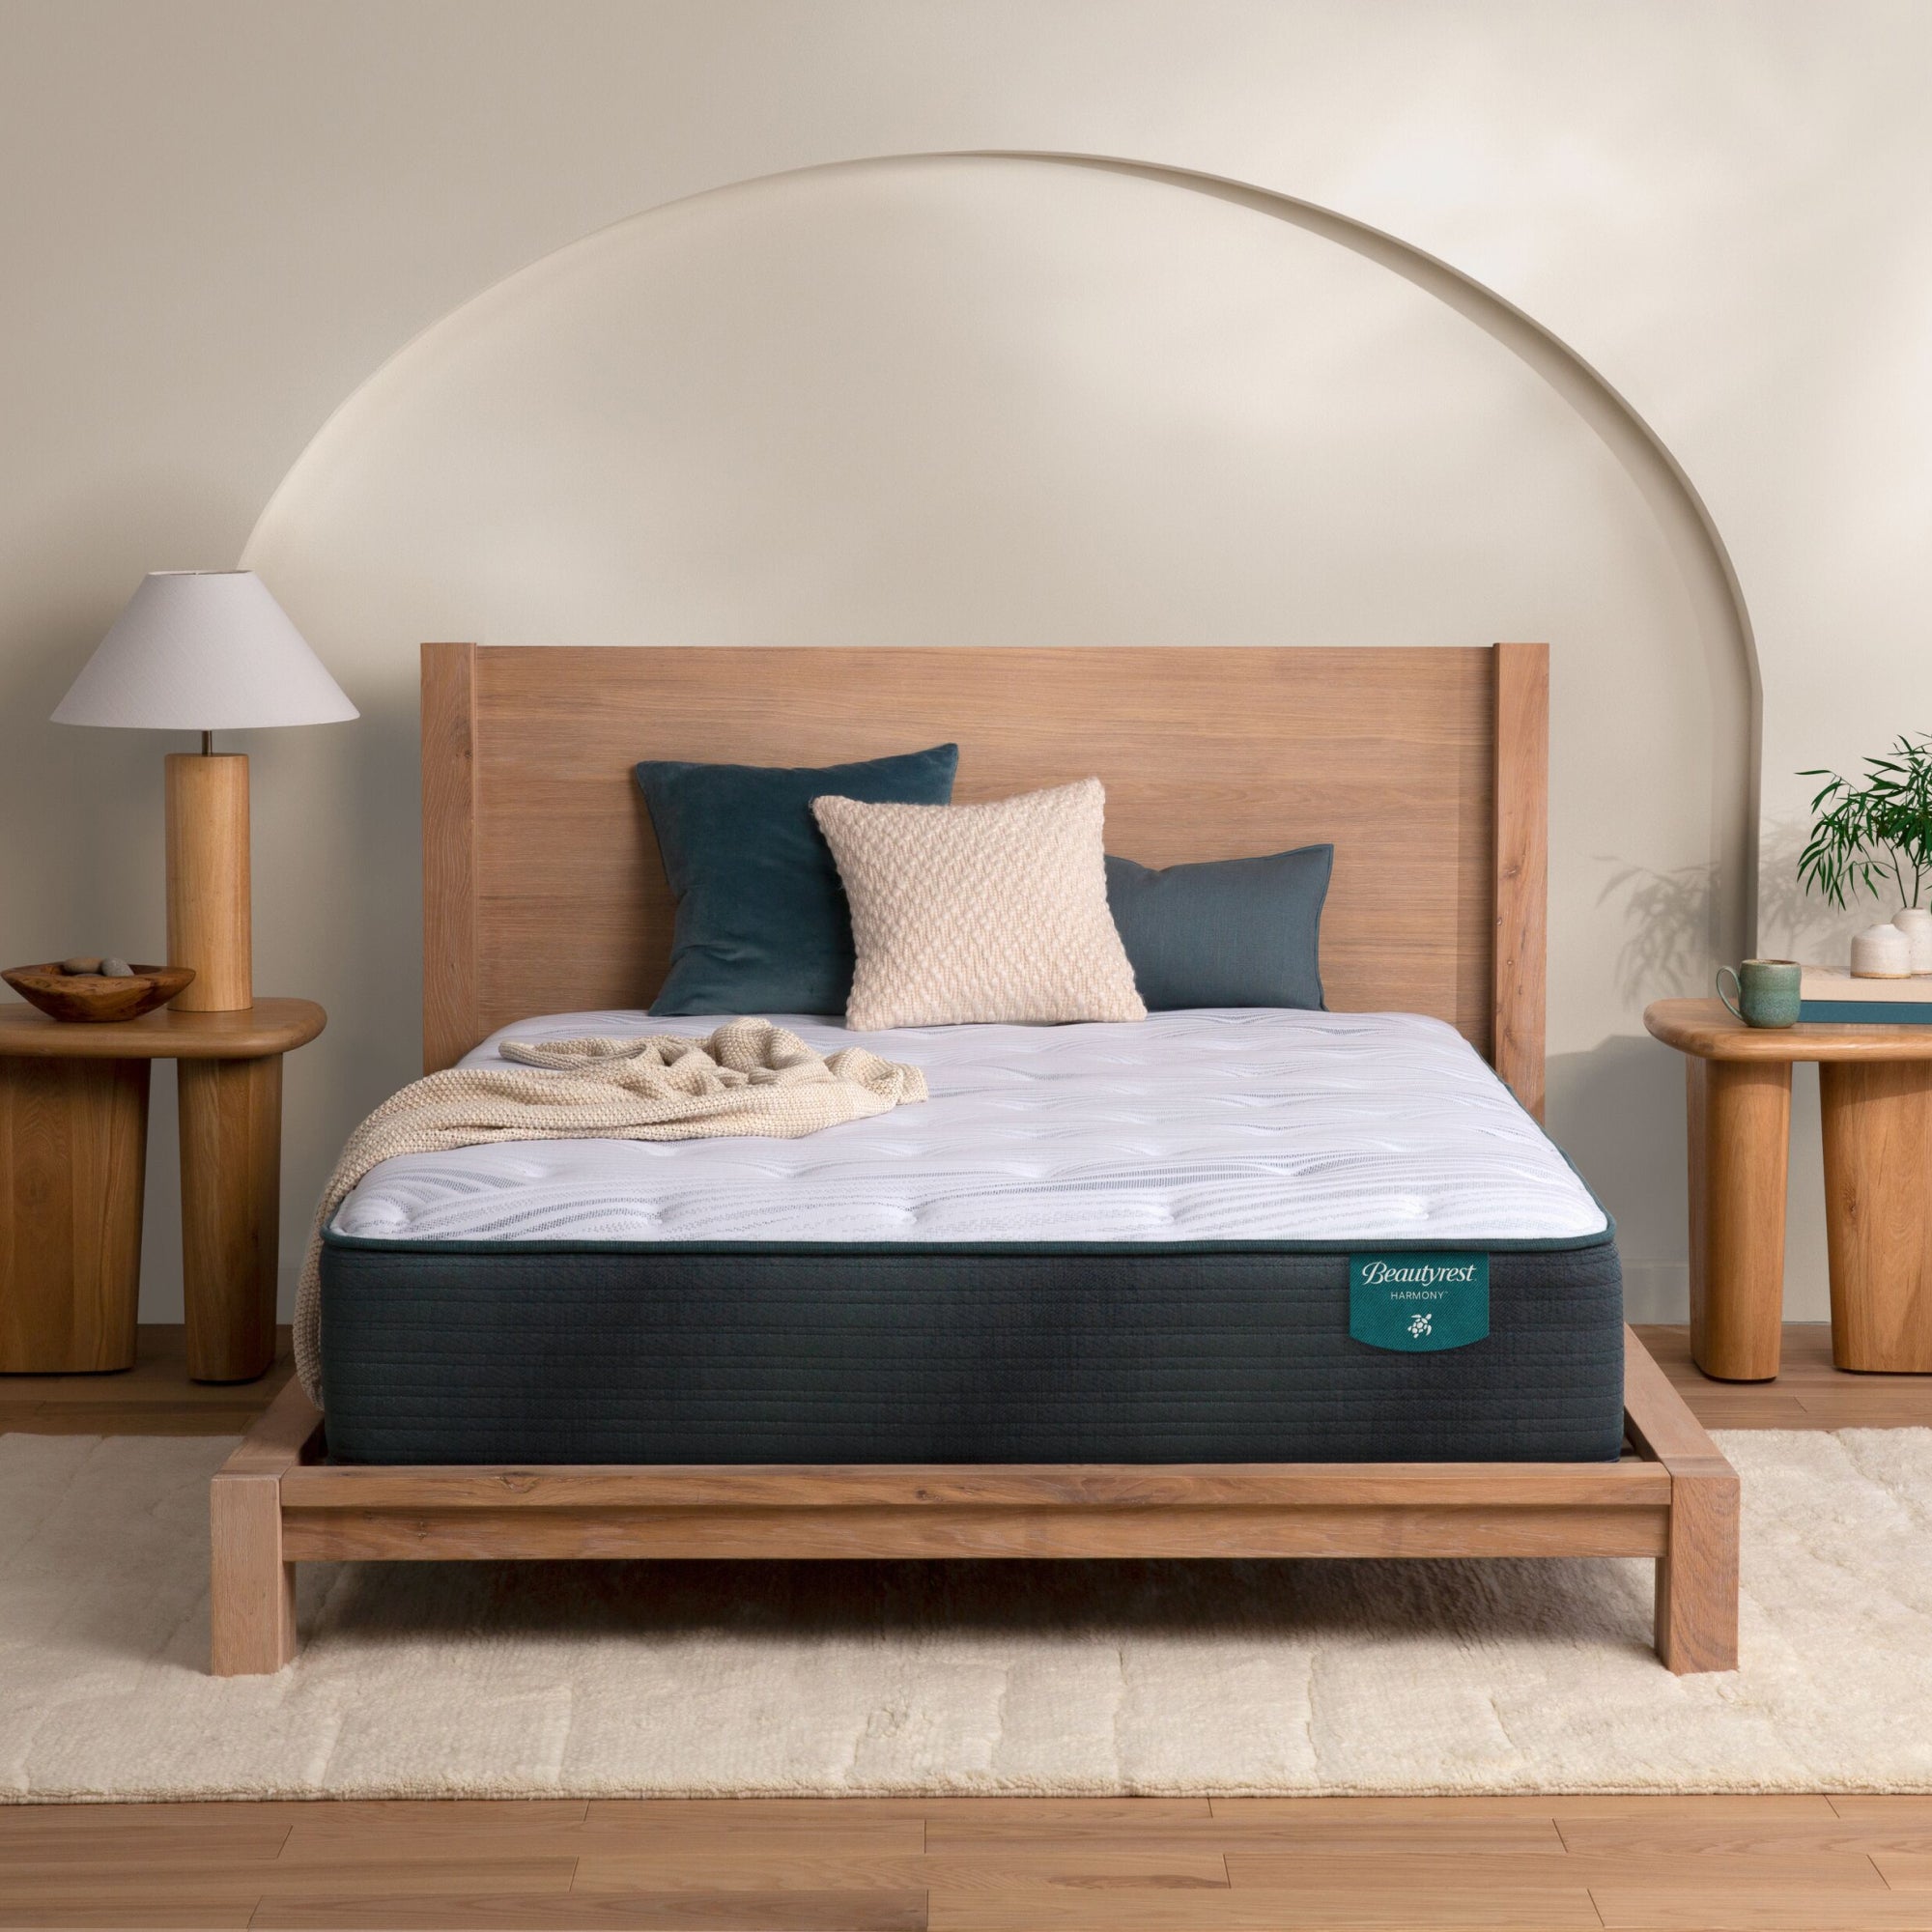 The Beautyrest Harmony medium mattress in a bedroom on a wooden bed|| series: Exceptional Cypress Bay || feel: medium